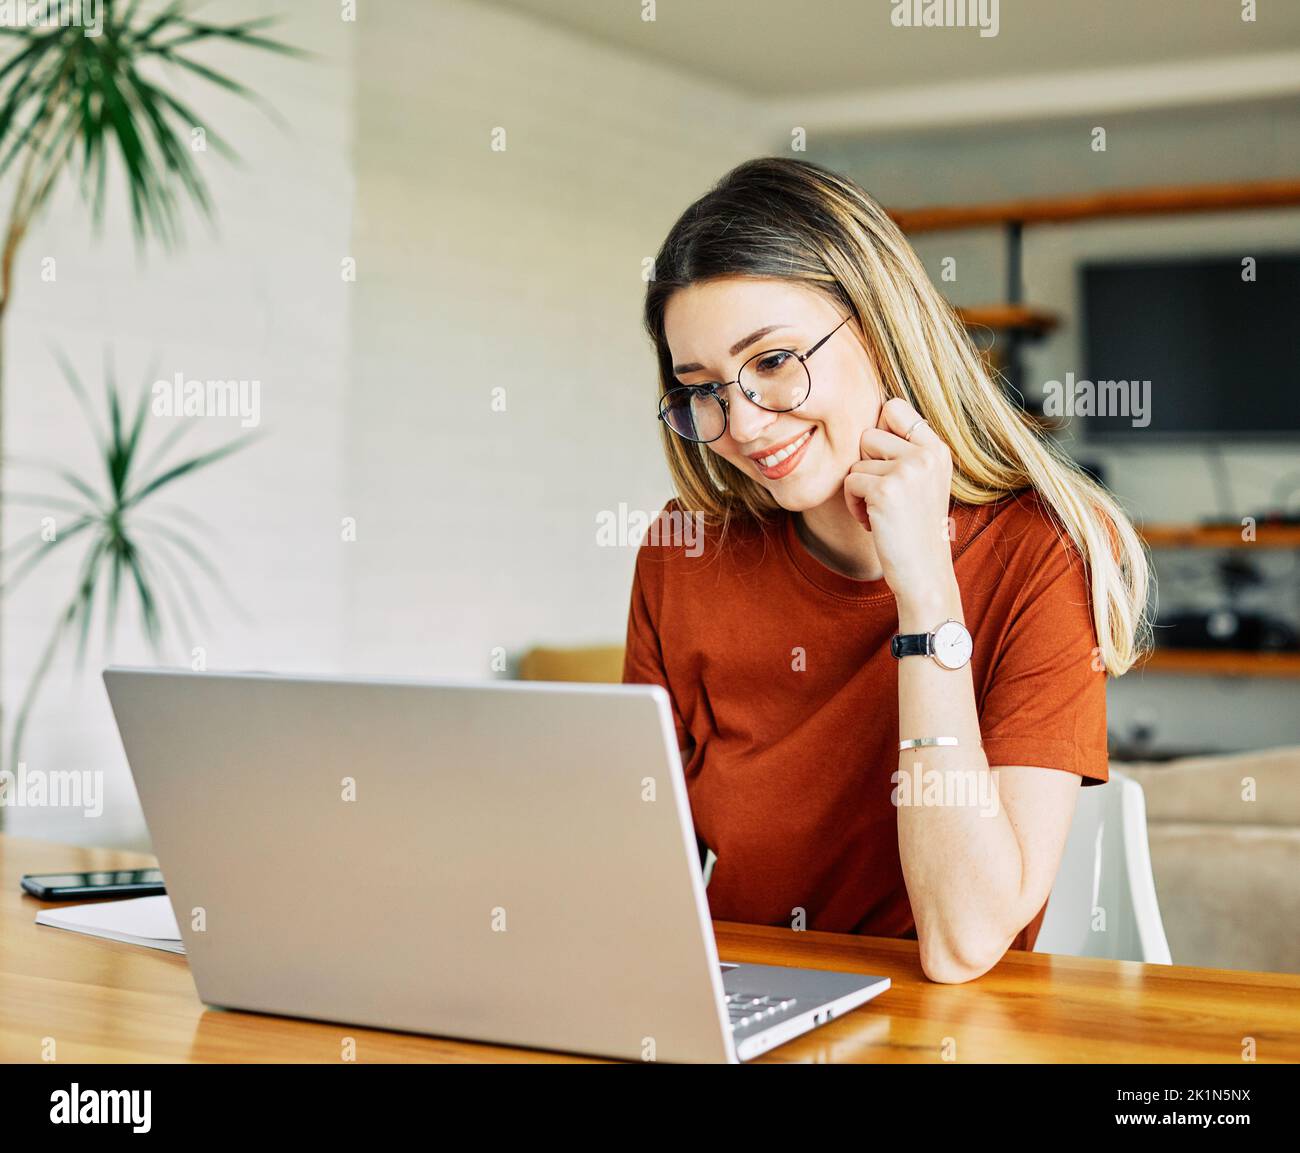 laptop computer girl woman home technology female internet young office business lifestyle student happy communication Stock Photo